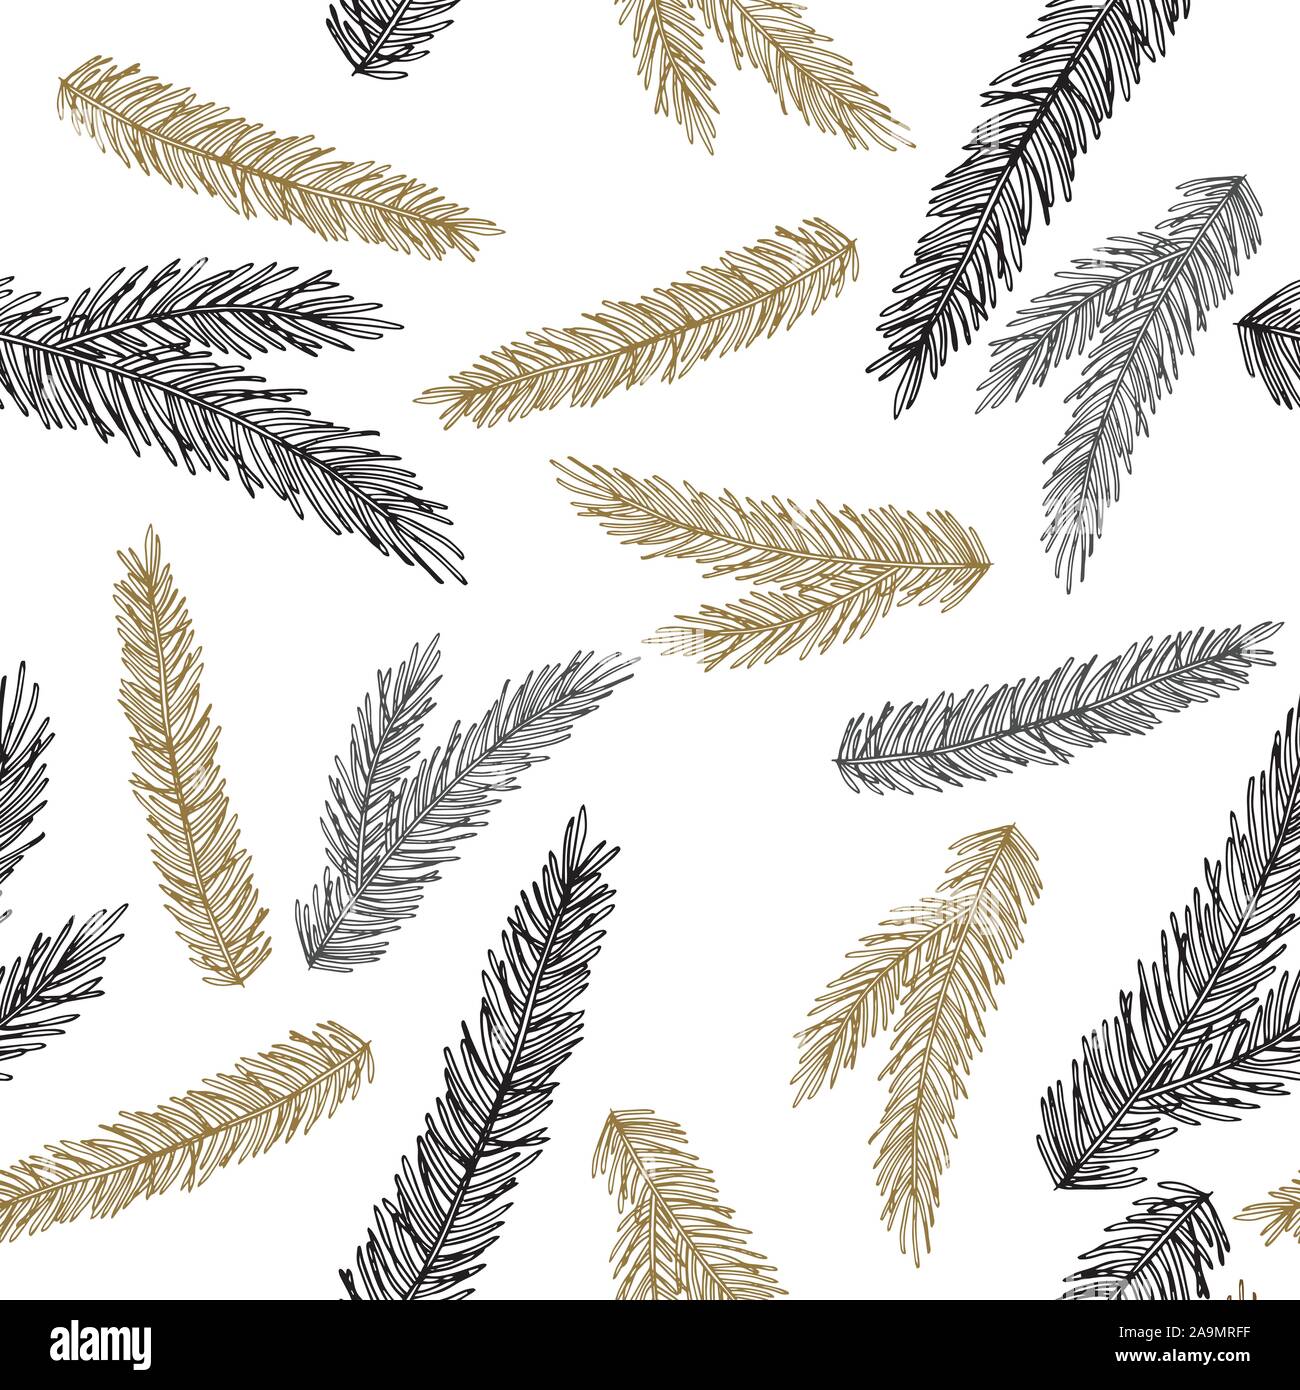 Xmas Seamless pattern with Christmas Tree Decorations, Pine Branches hand drawn art design vector illustration. Stock Vector